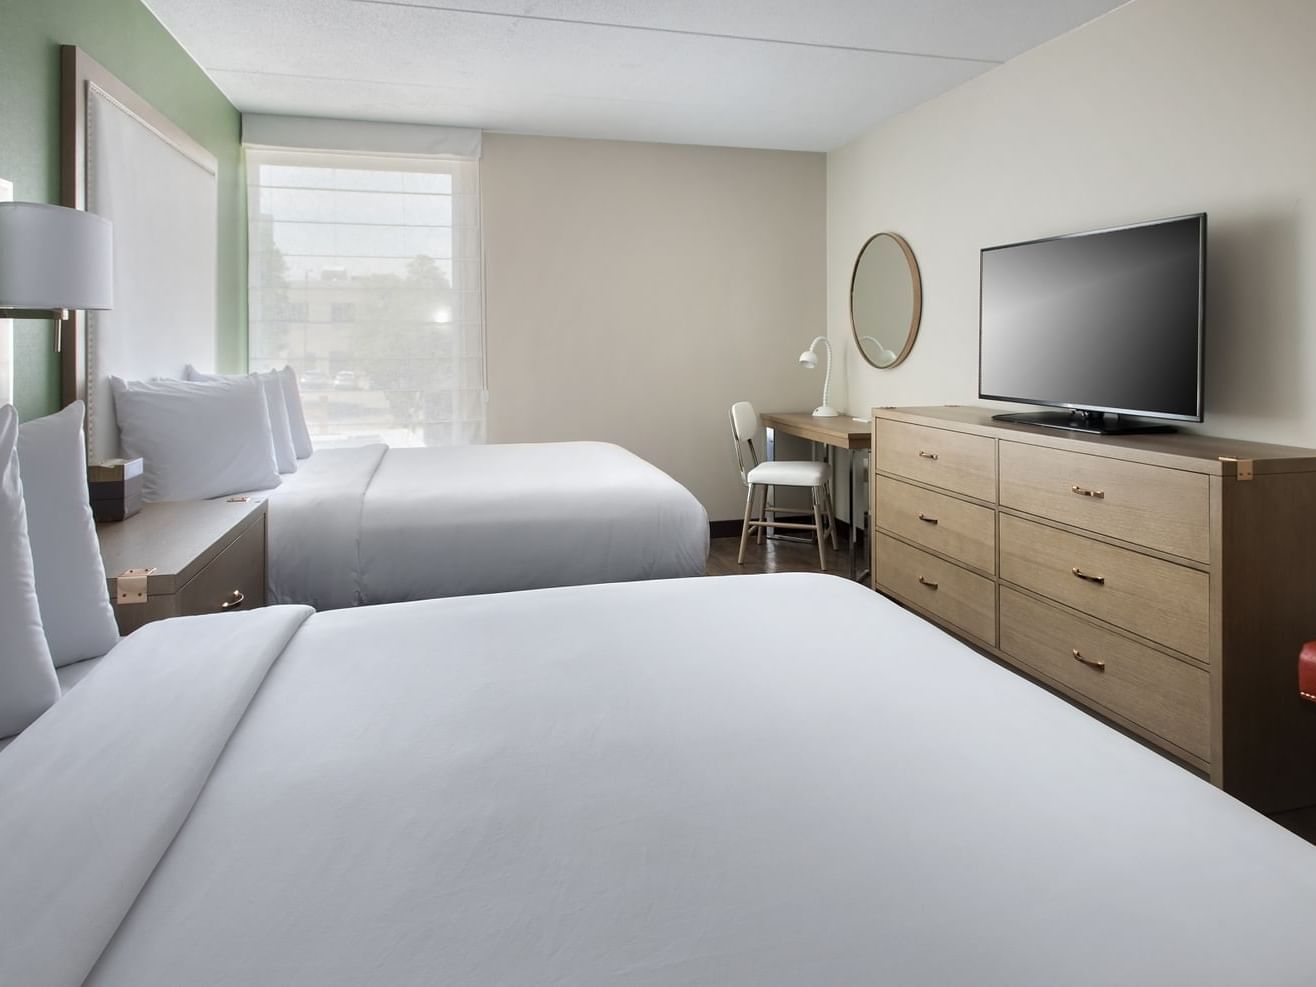 Double Queen Room with cozy beds and TV at Hayes Street Hotel